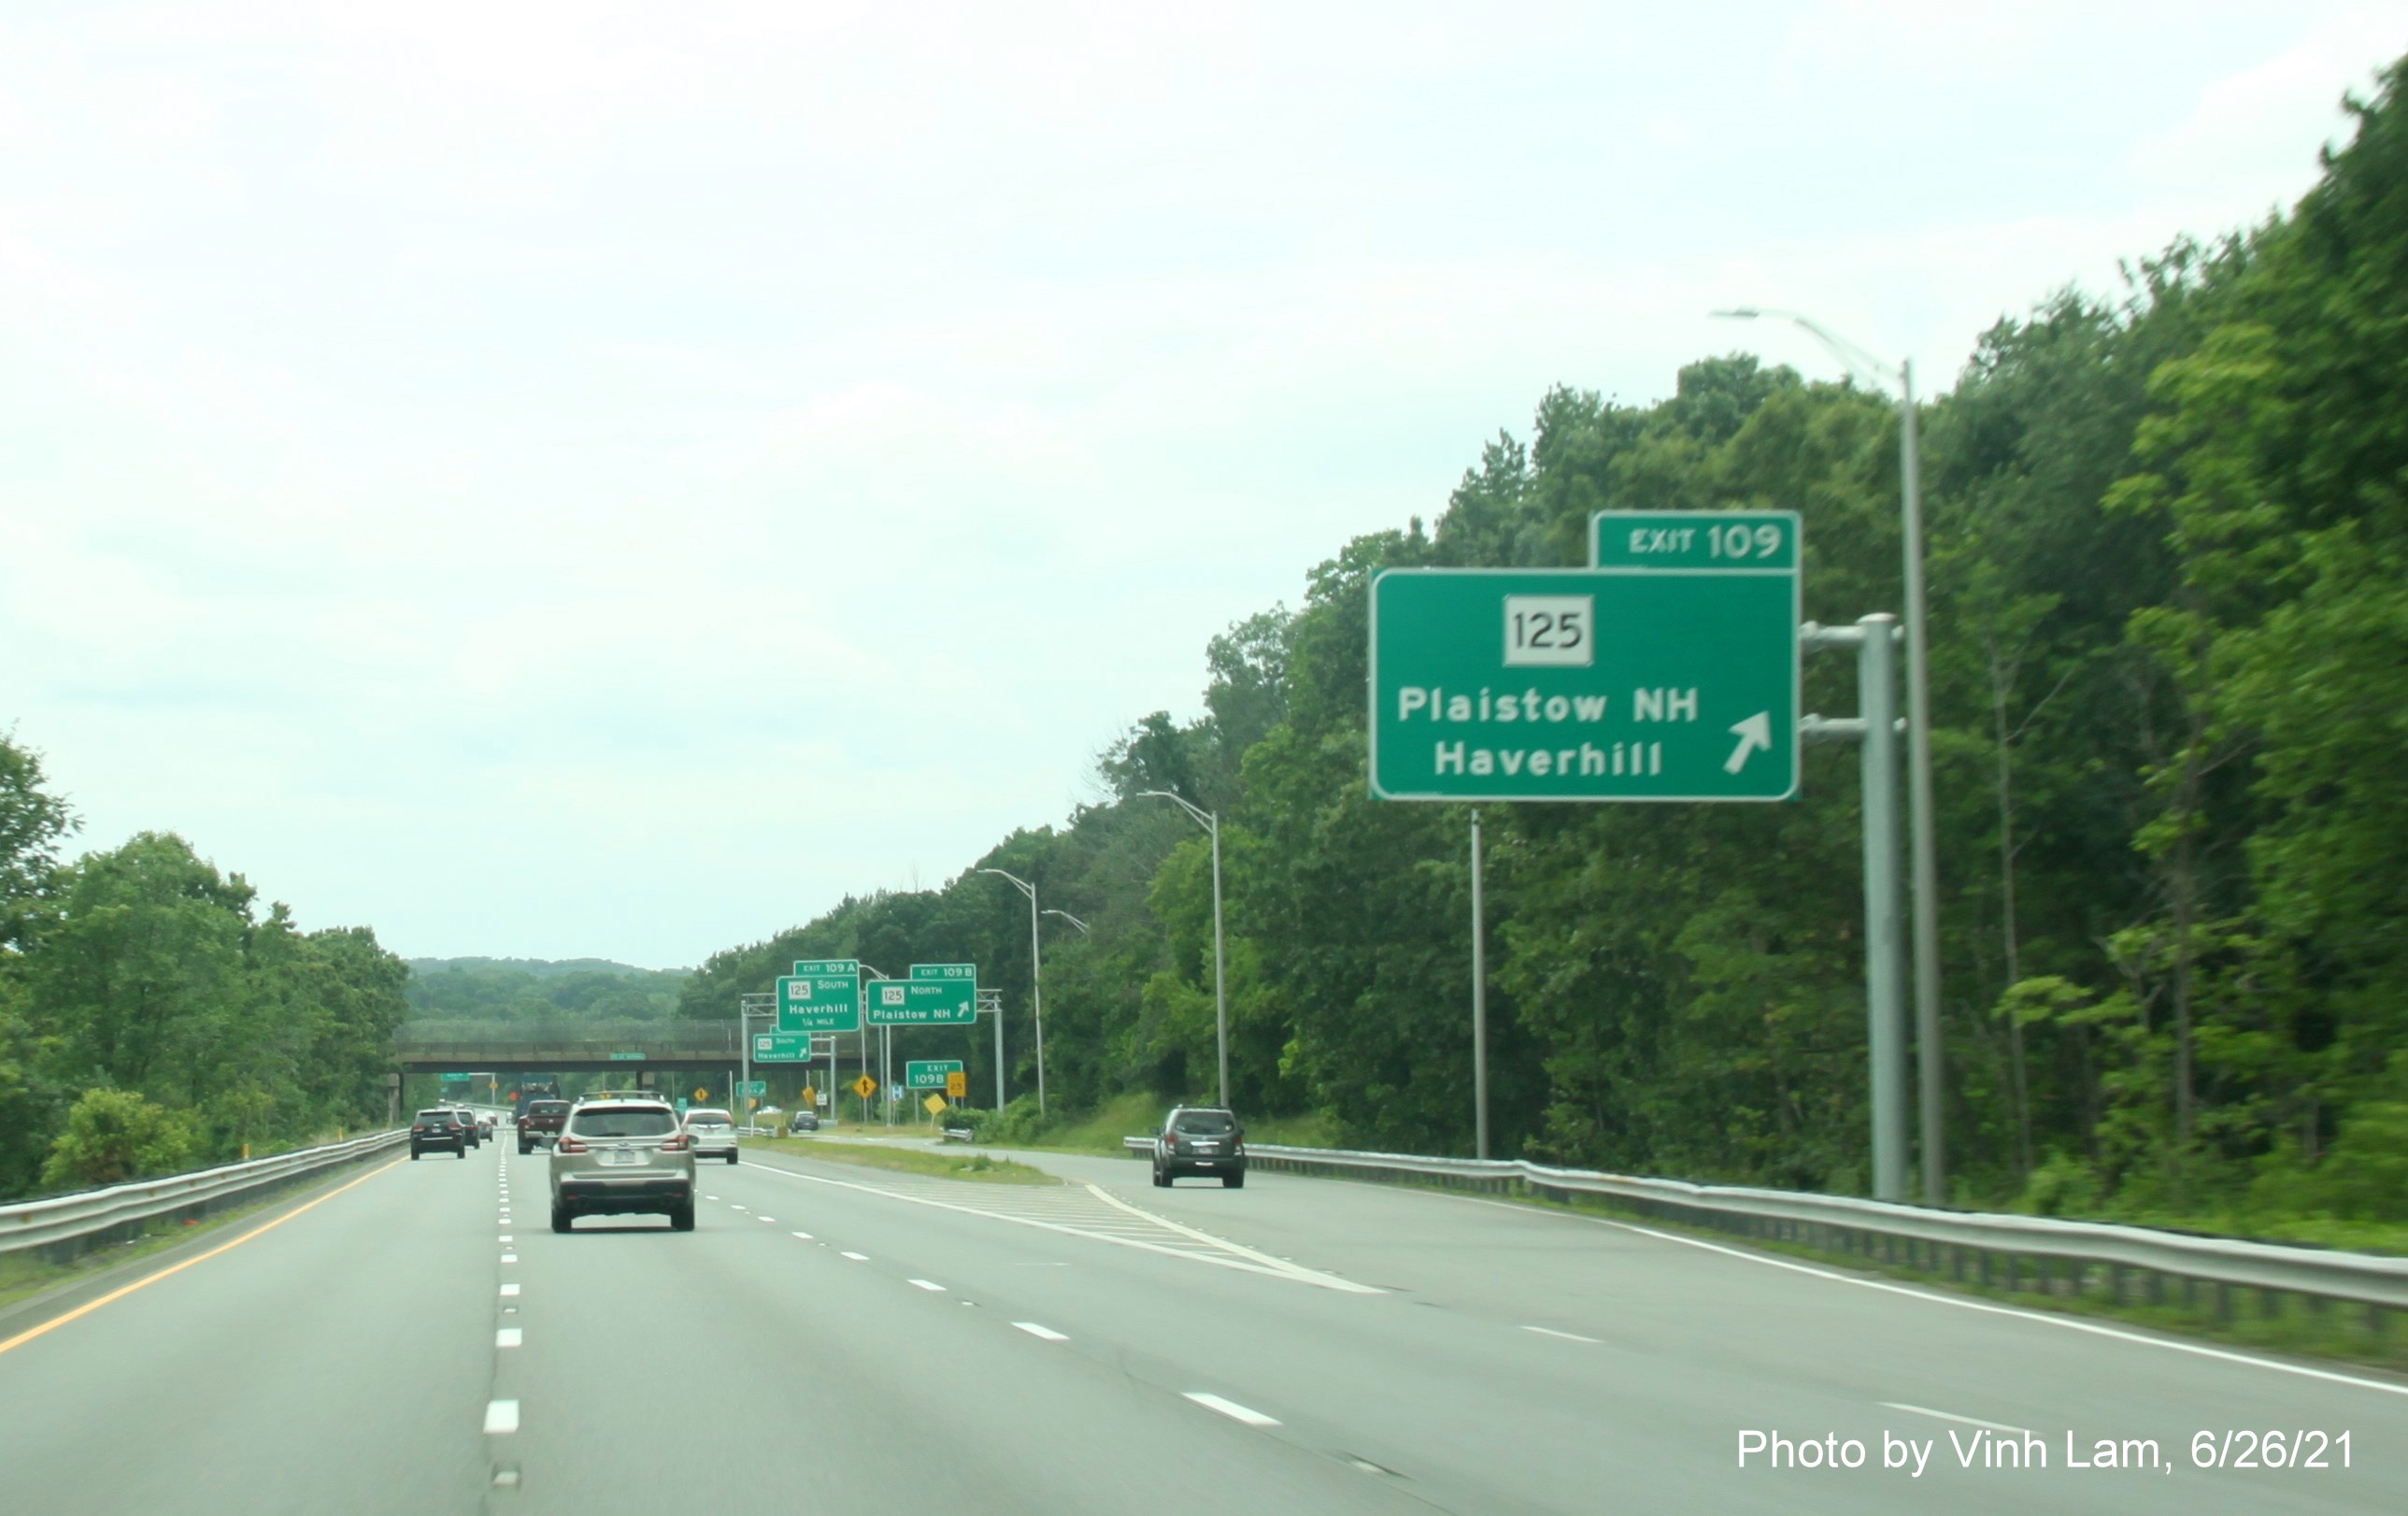 Image of overhead C/D ramp sign for MA 125 exit with new milepost based exit numbers on I-495 South in Haverhill, photo by Vinh Lam, June 2021